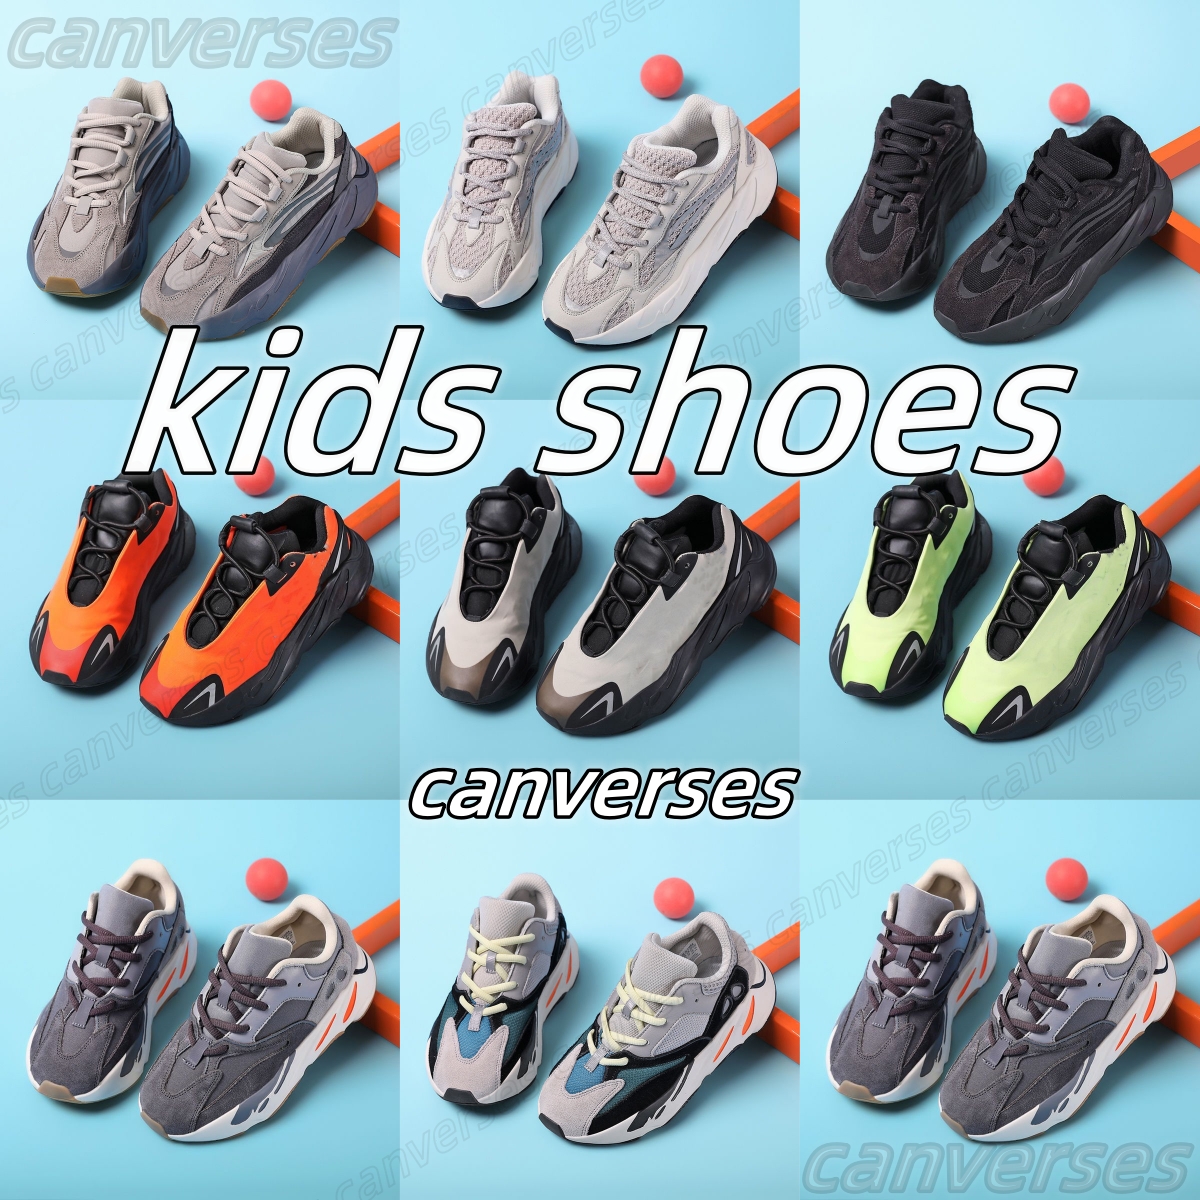 

Kids shoes toddlers wave runner 700 sneakers children running Sport Shoe Youth Kid Outdoor Sport Trainers Boys Girls Runners Athletic Sneaker Boy Girl Static Resin